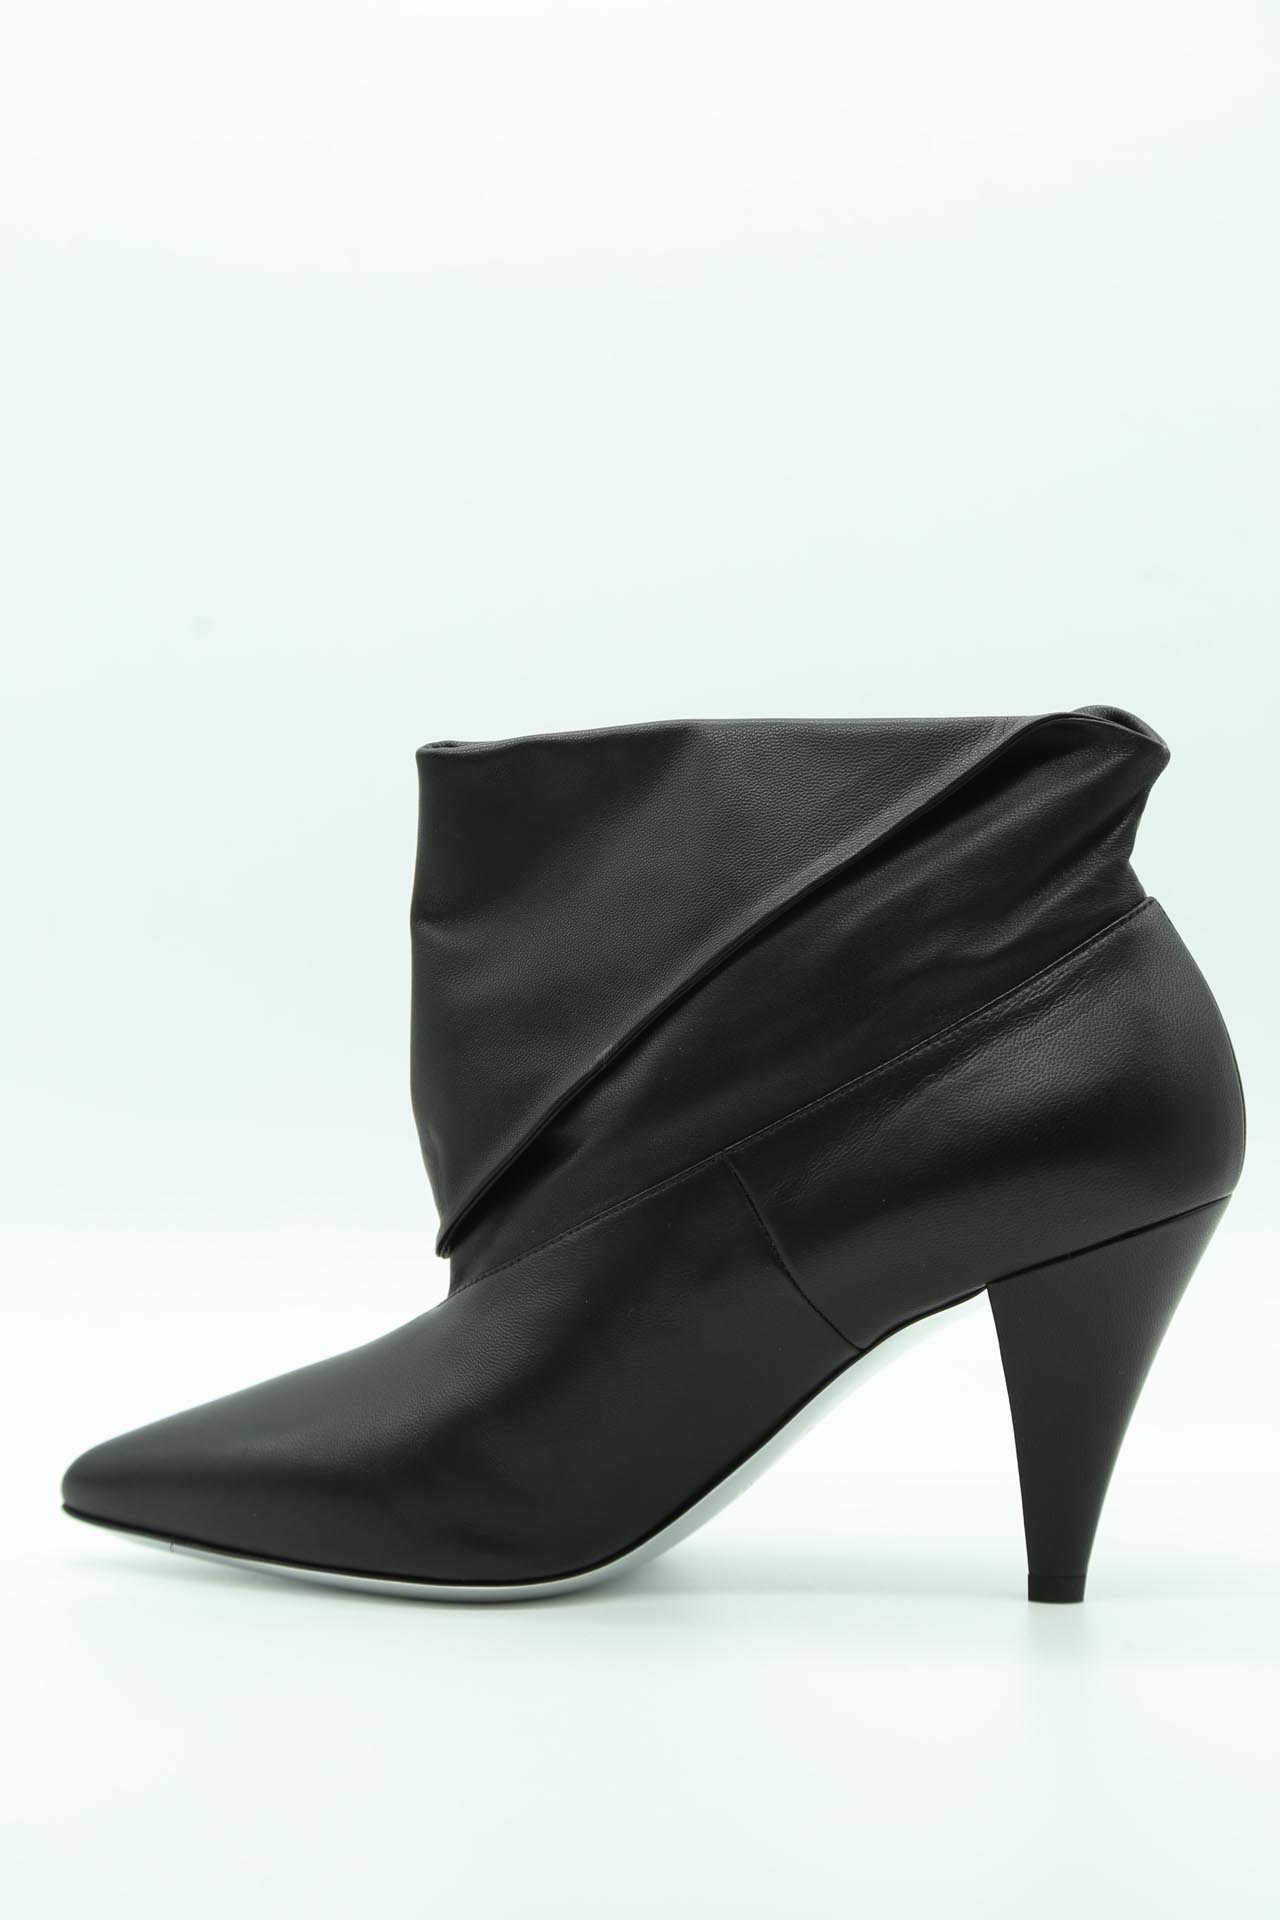 Givenchy, Ankle Boots